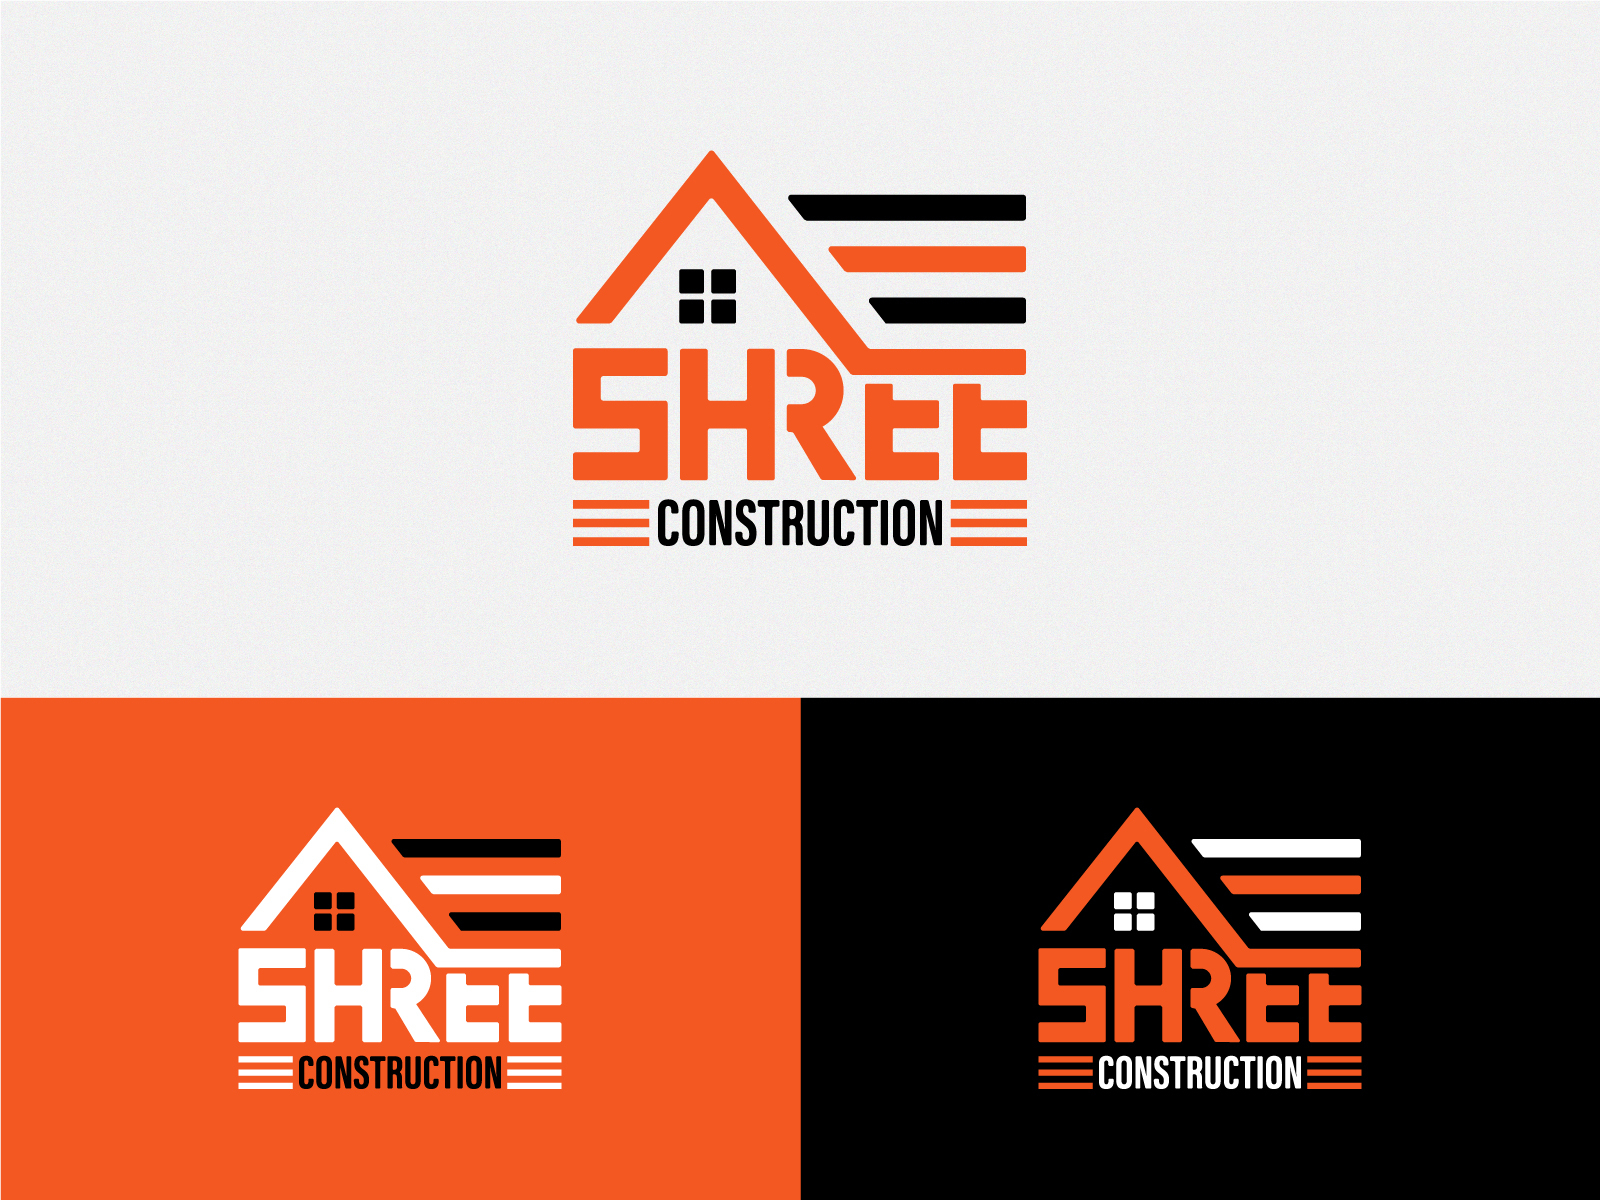 Real Estate Construction Logo Design by Muhammad Akhtar on Dribbble